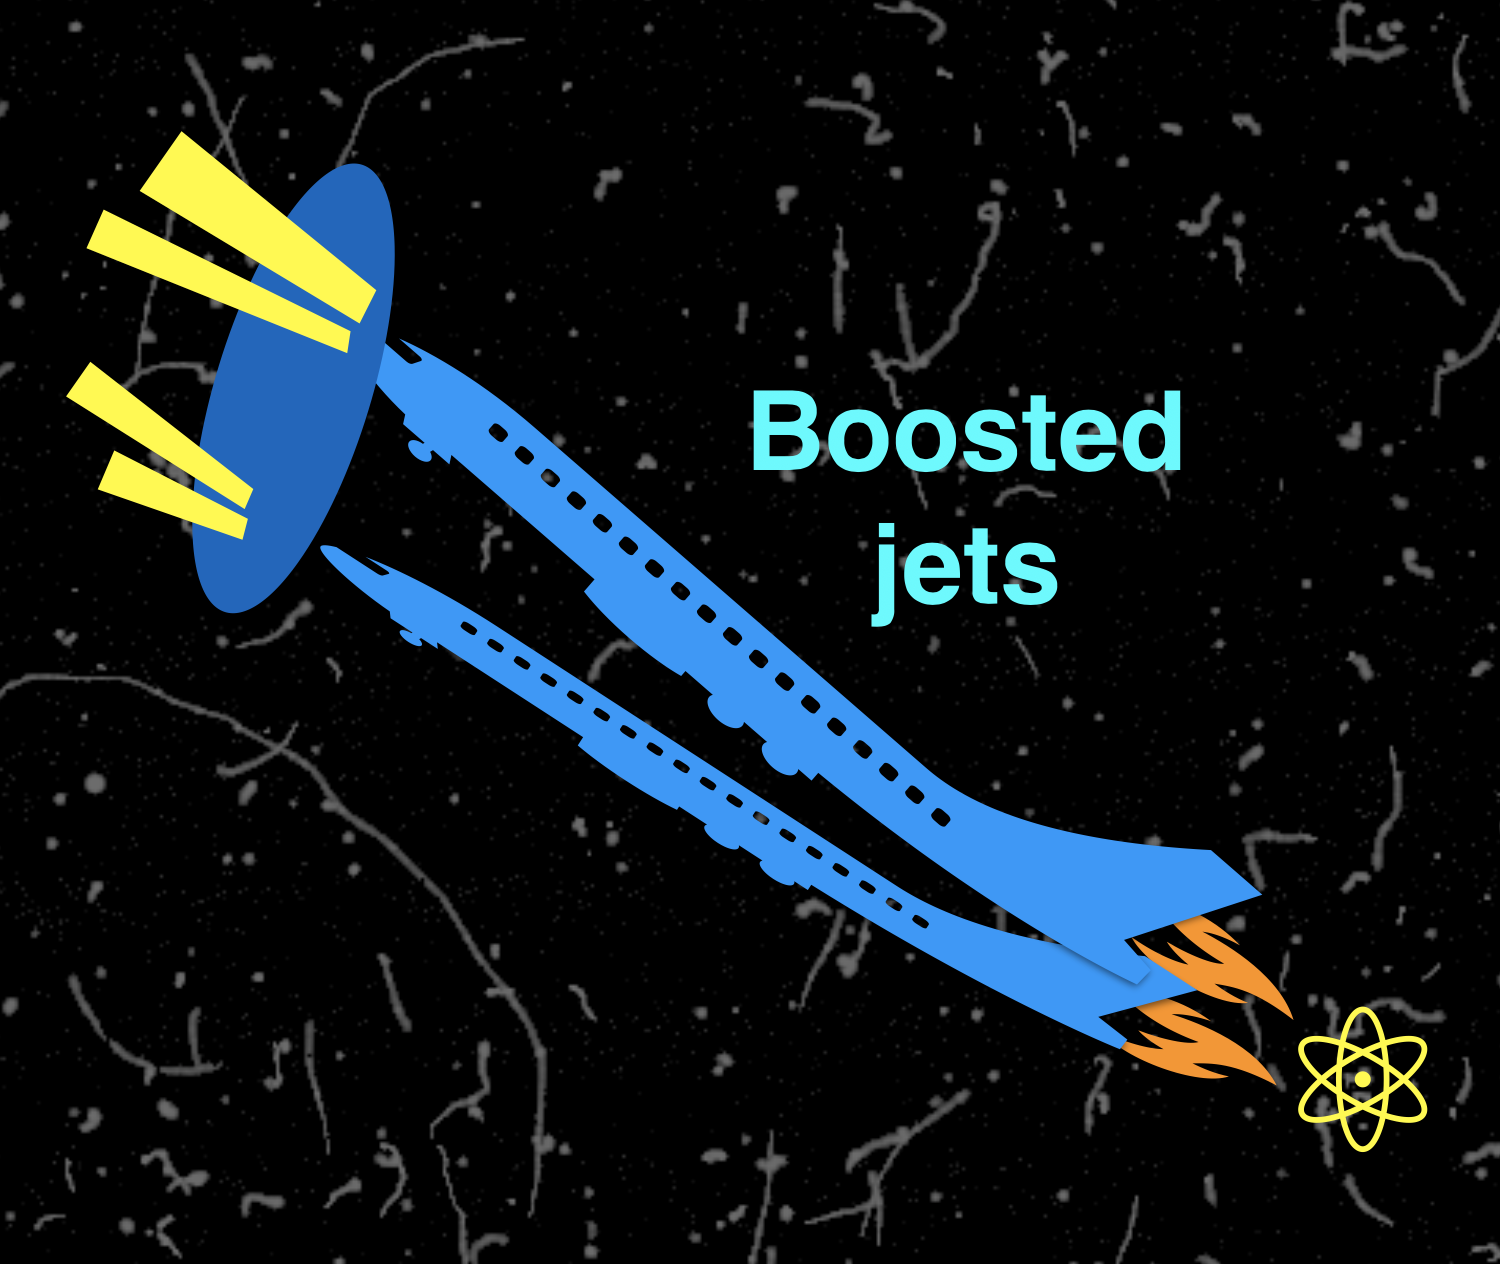 Booasted jets